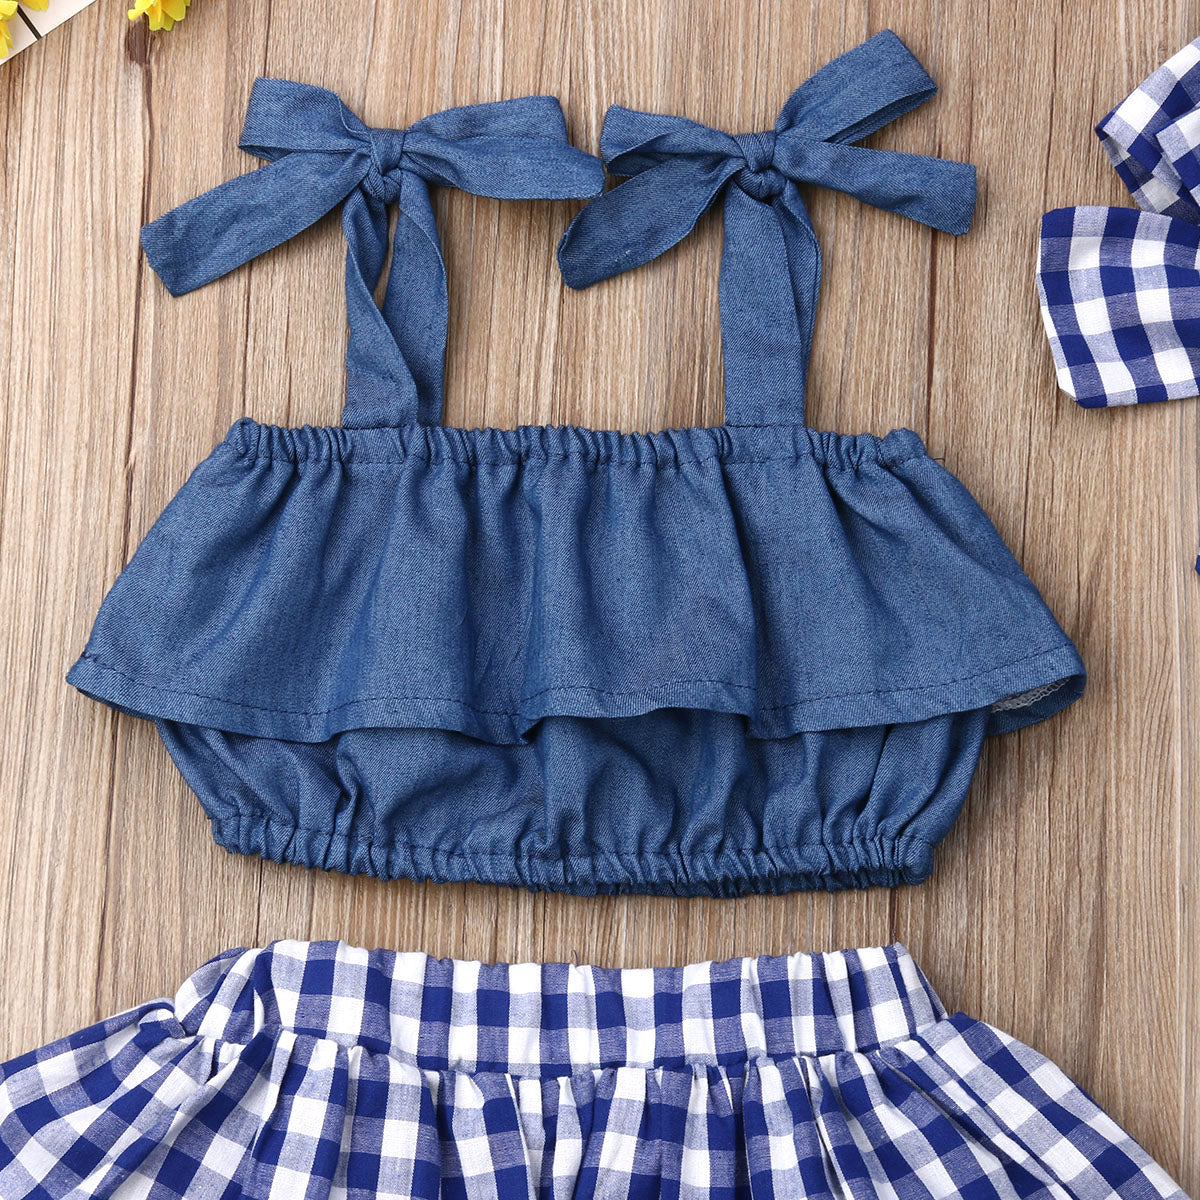 Pudcoco Newest Fashion Summer Newborn Baby Girl Clothes Sling Ruffle